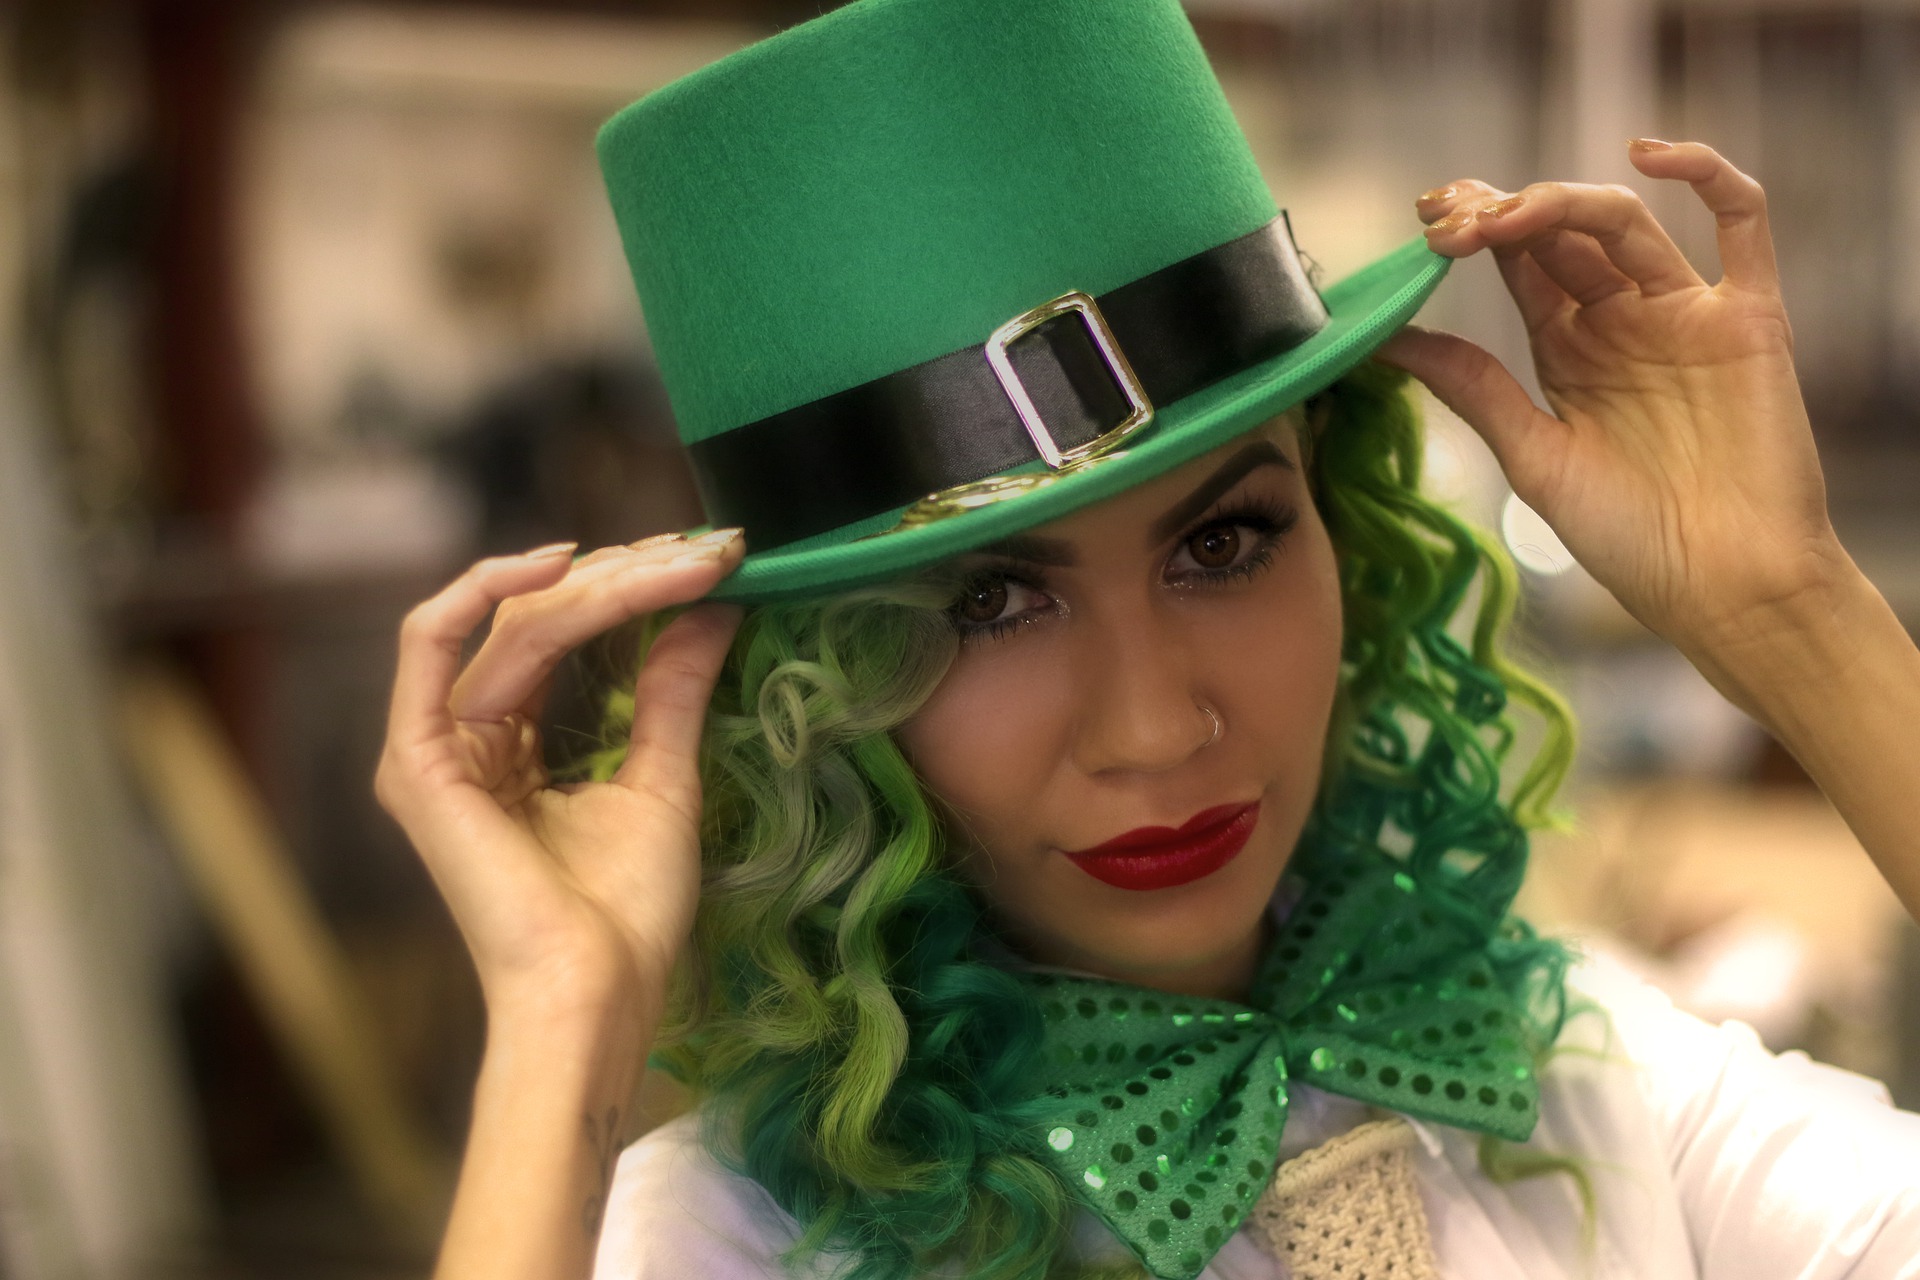 Geek insider, geekinsider, geekinsider. Com,, why do casino games and other pop culture use the symbolism of leprechauns? , internet